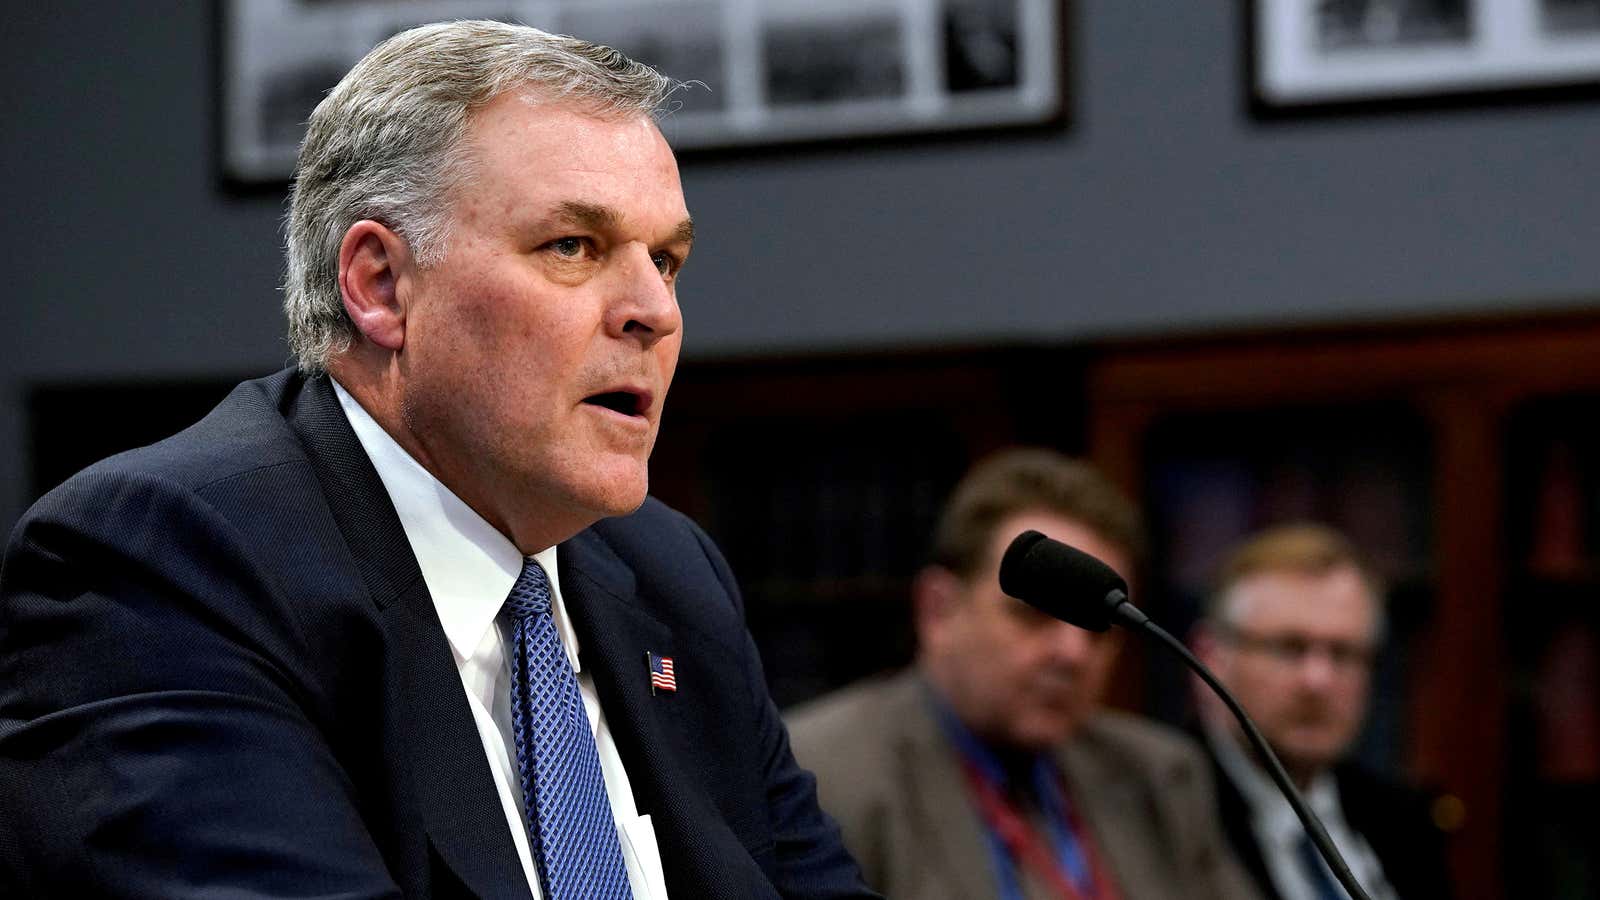 IRS chief Charles Rettig has some more auditing to do.